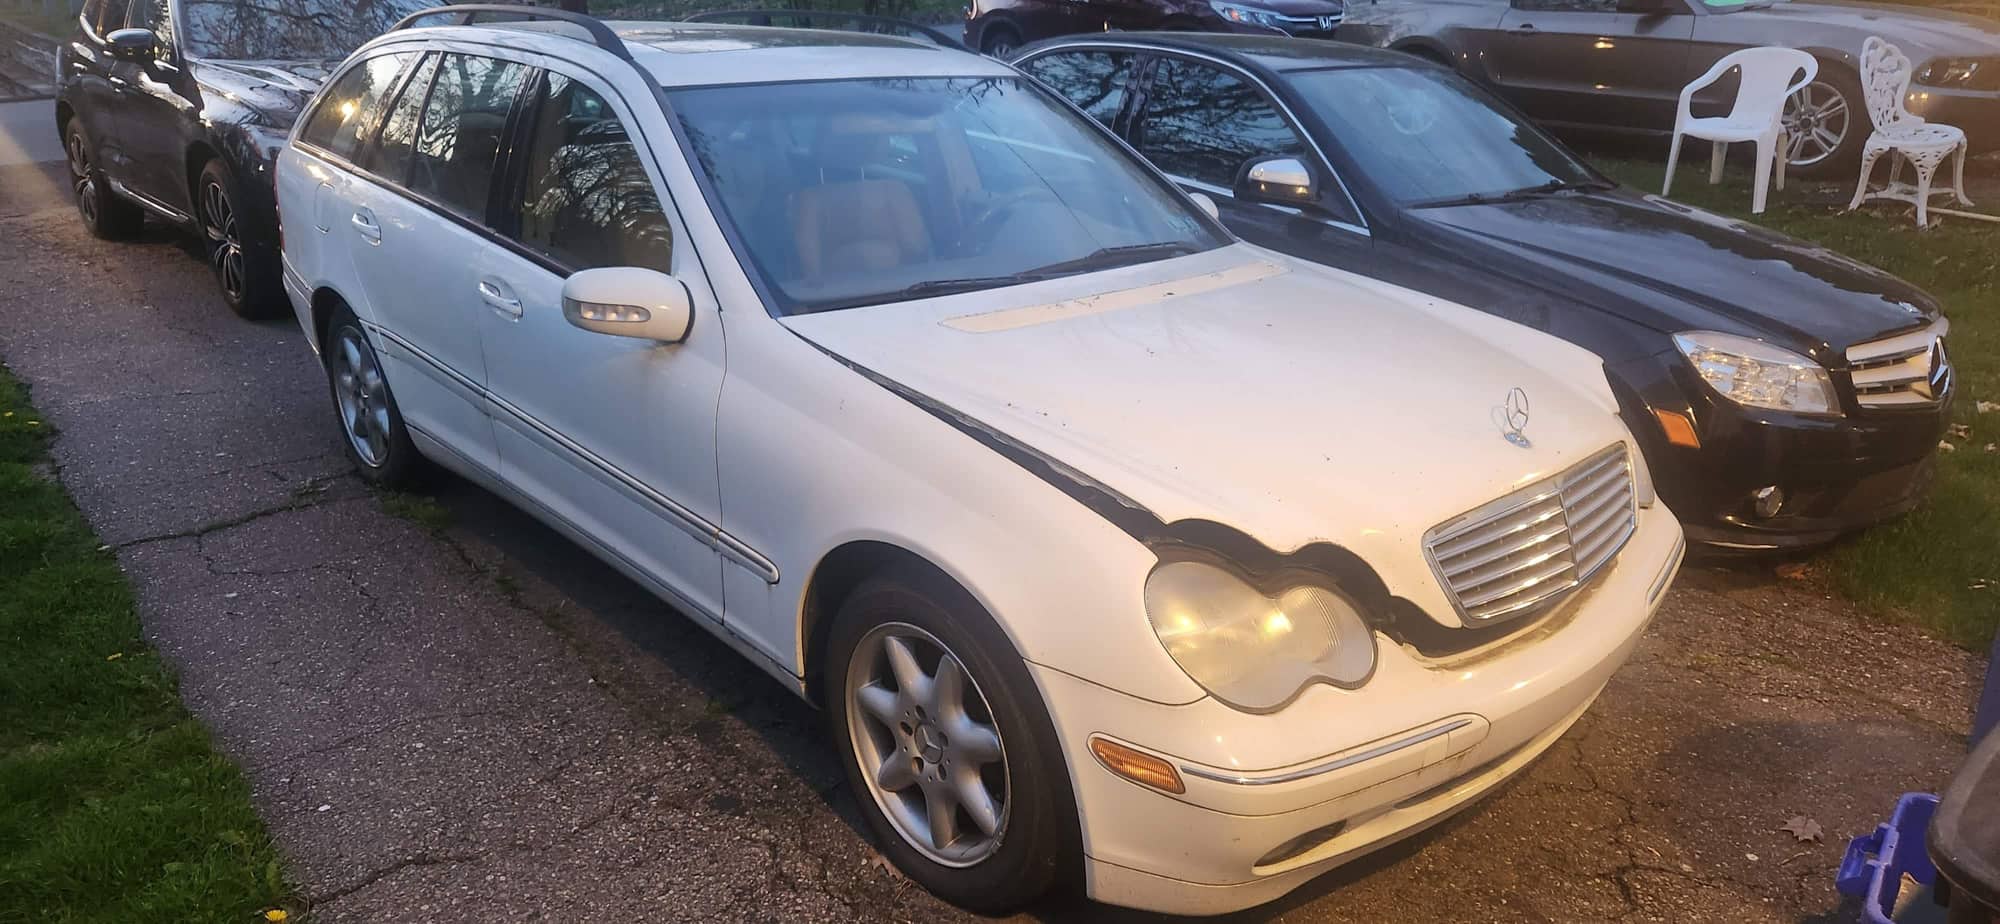 2004 Mercedes-Benz C240 - Our 2004 C240 Wagon Must Go - $1800 - Used - VIN WDBRH81J04F523090 - 130,256 Miles - 4 cyl - AWD - Automatic - Wagon - White - Clarks Summit, PA 18411, United States